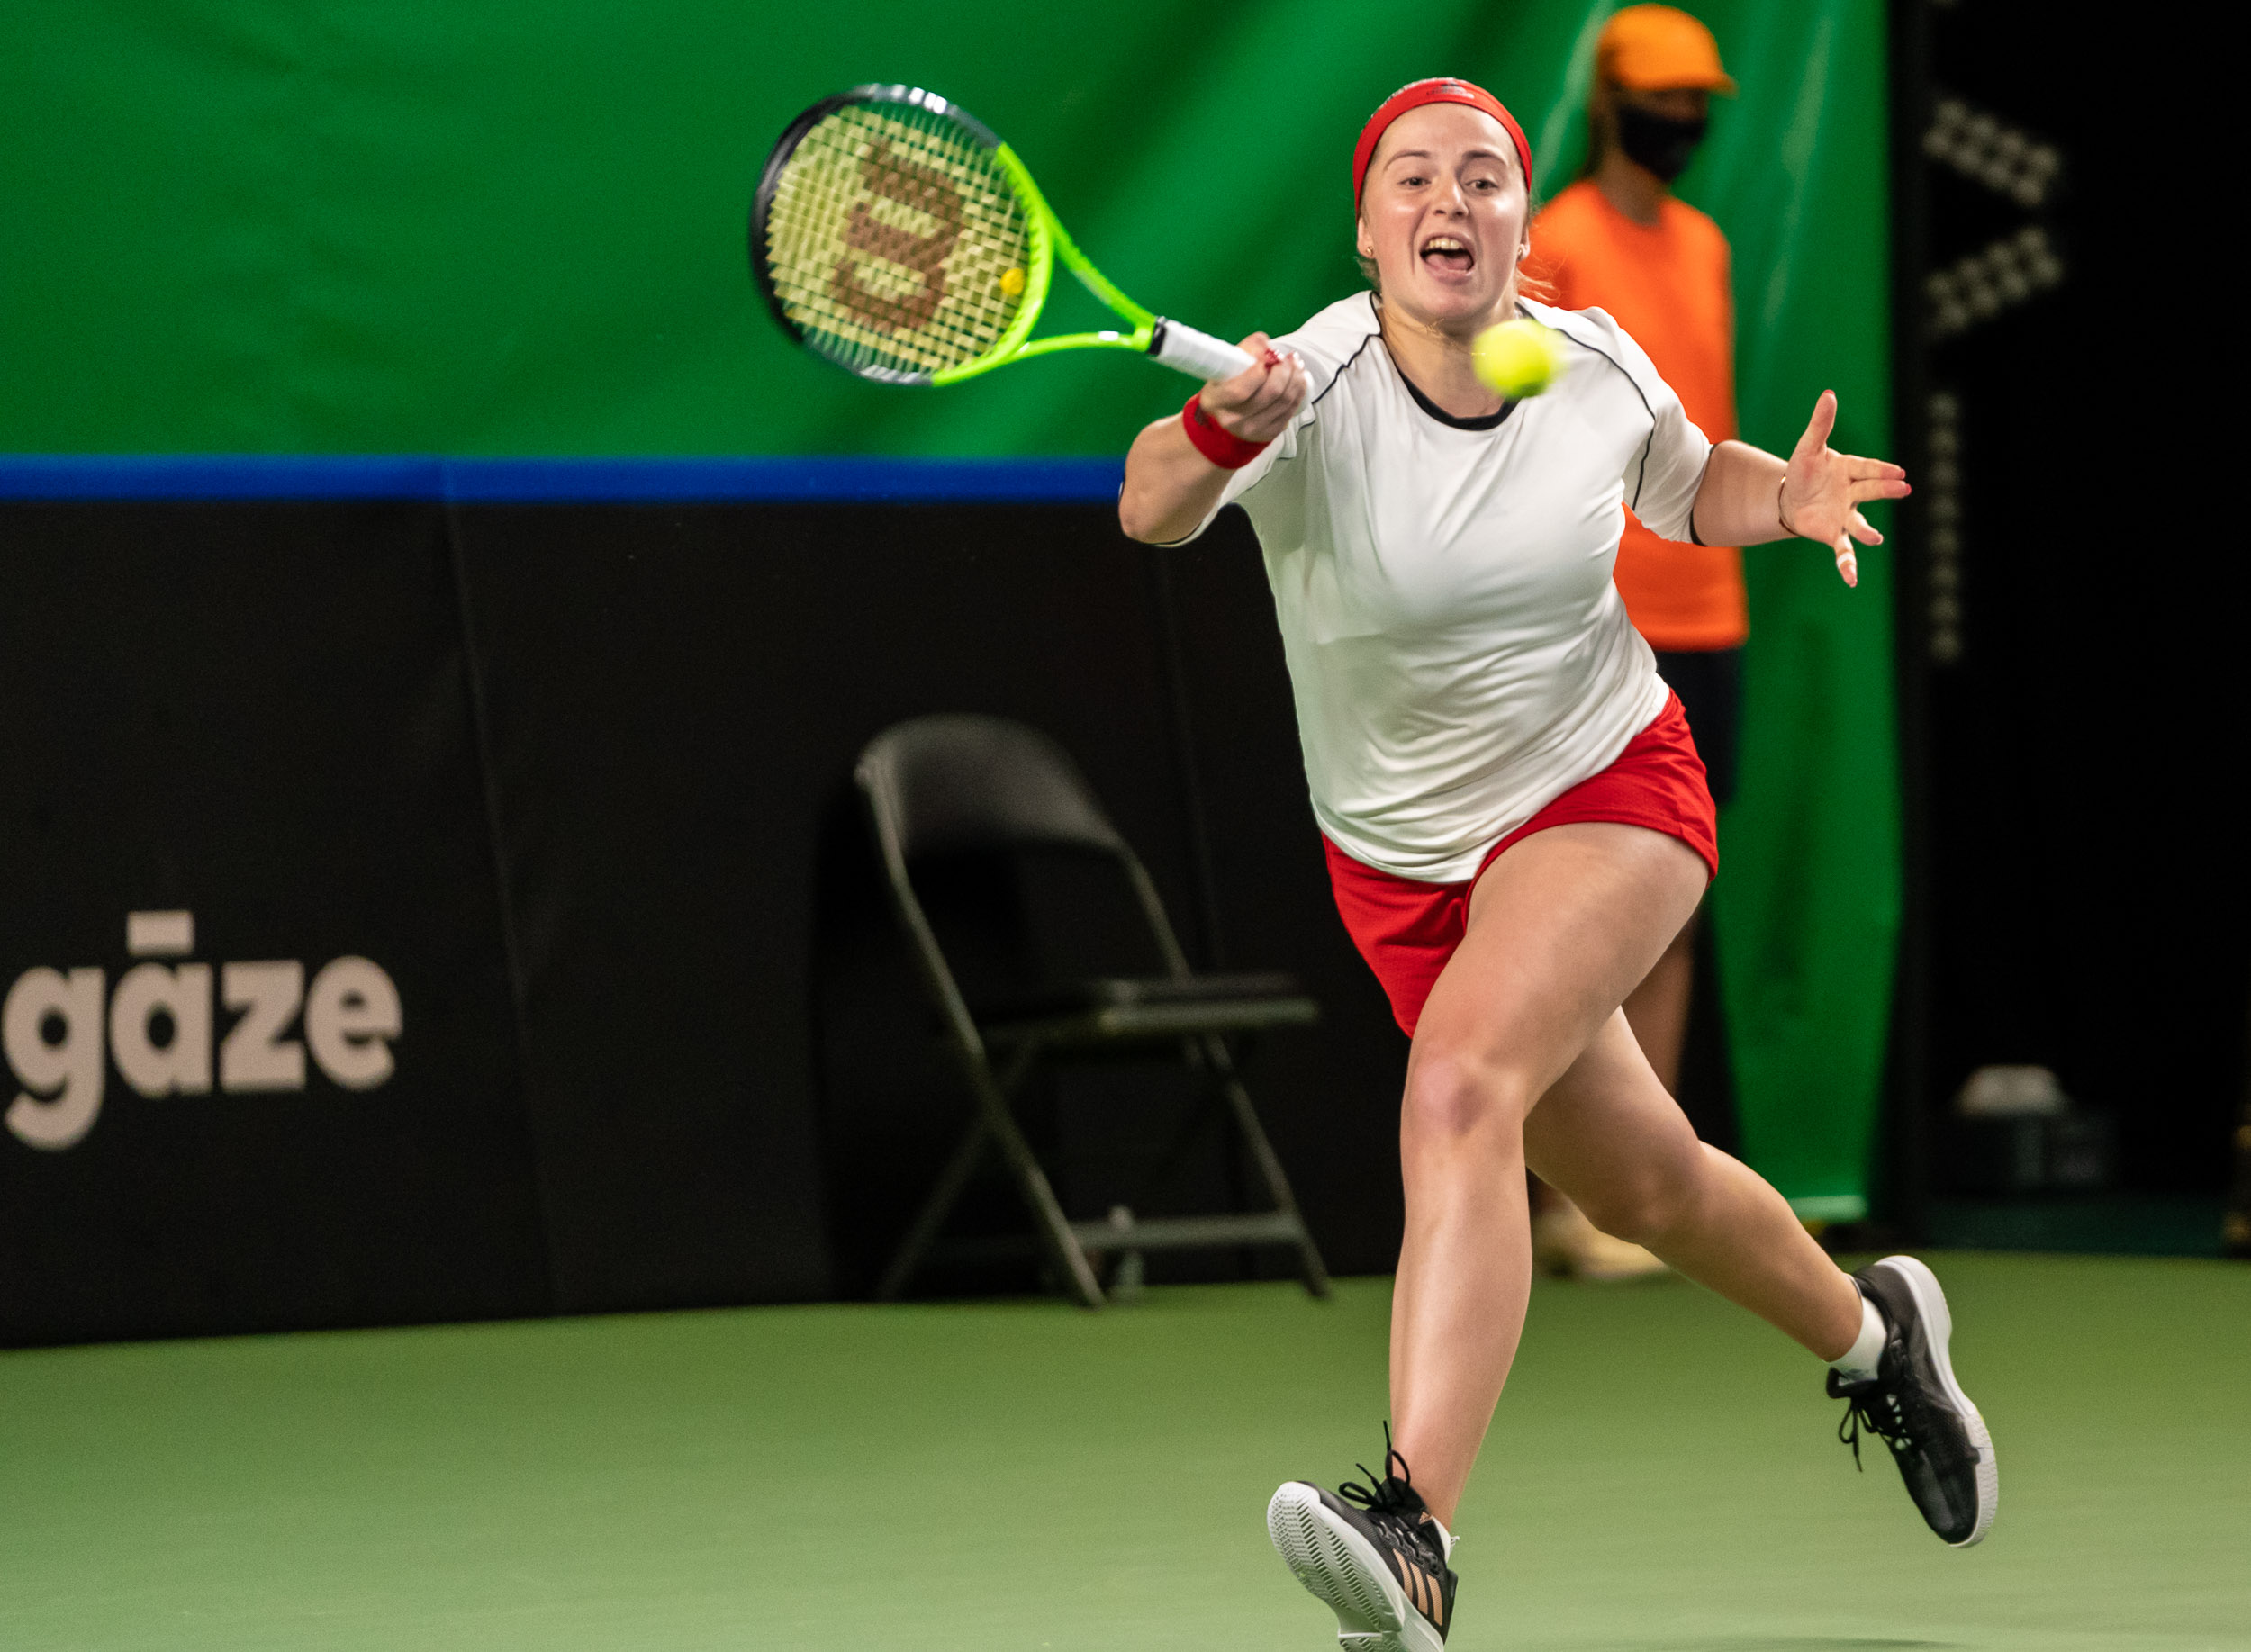 “I had the confidence that I am a better player and that confidence helped me to play well on the crucial points” – Jelena Ostapenko